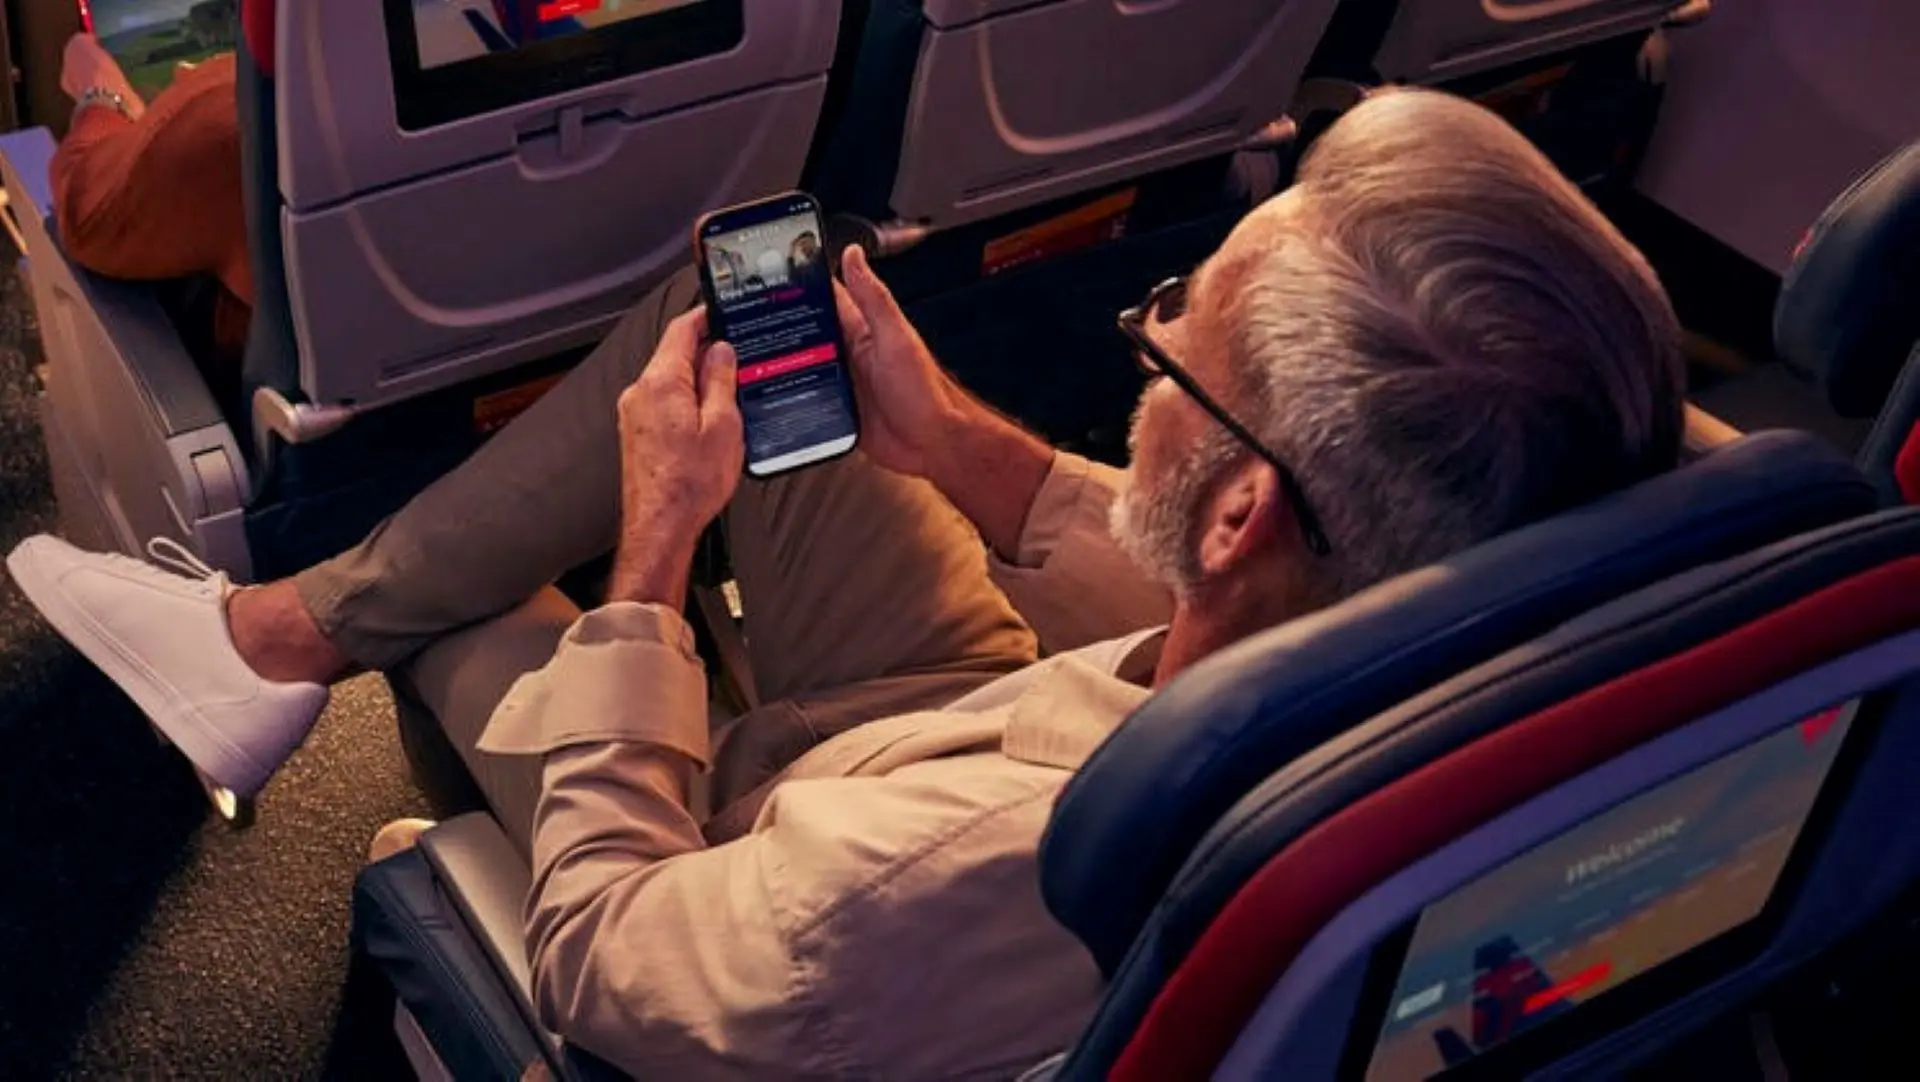 Airlines News - Delta and T-Mobile to offer free Wi-Fi